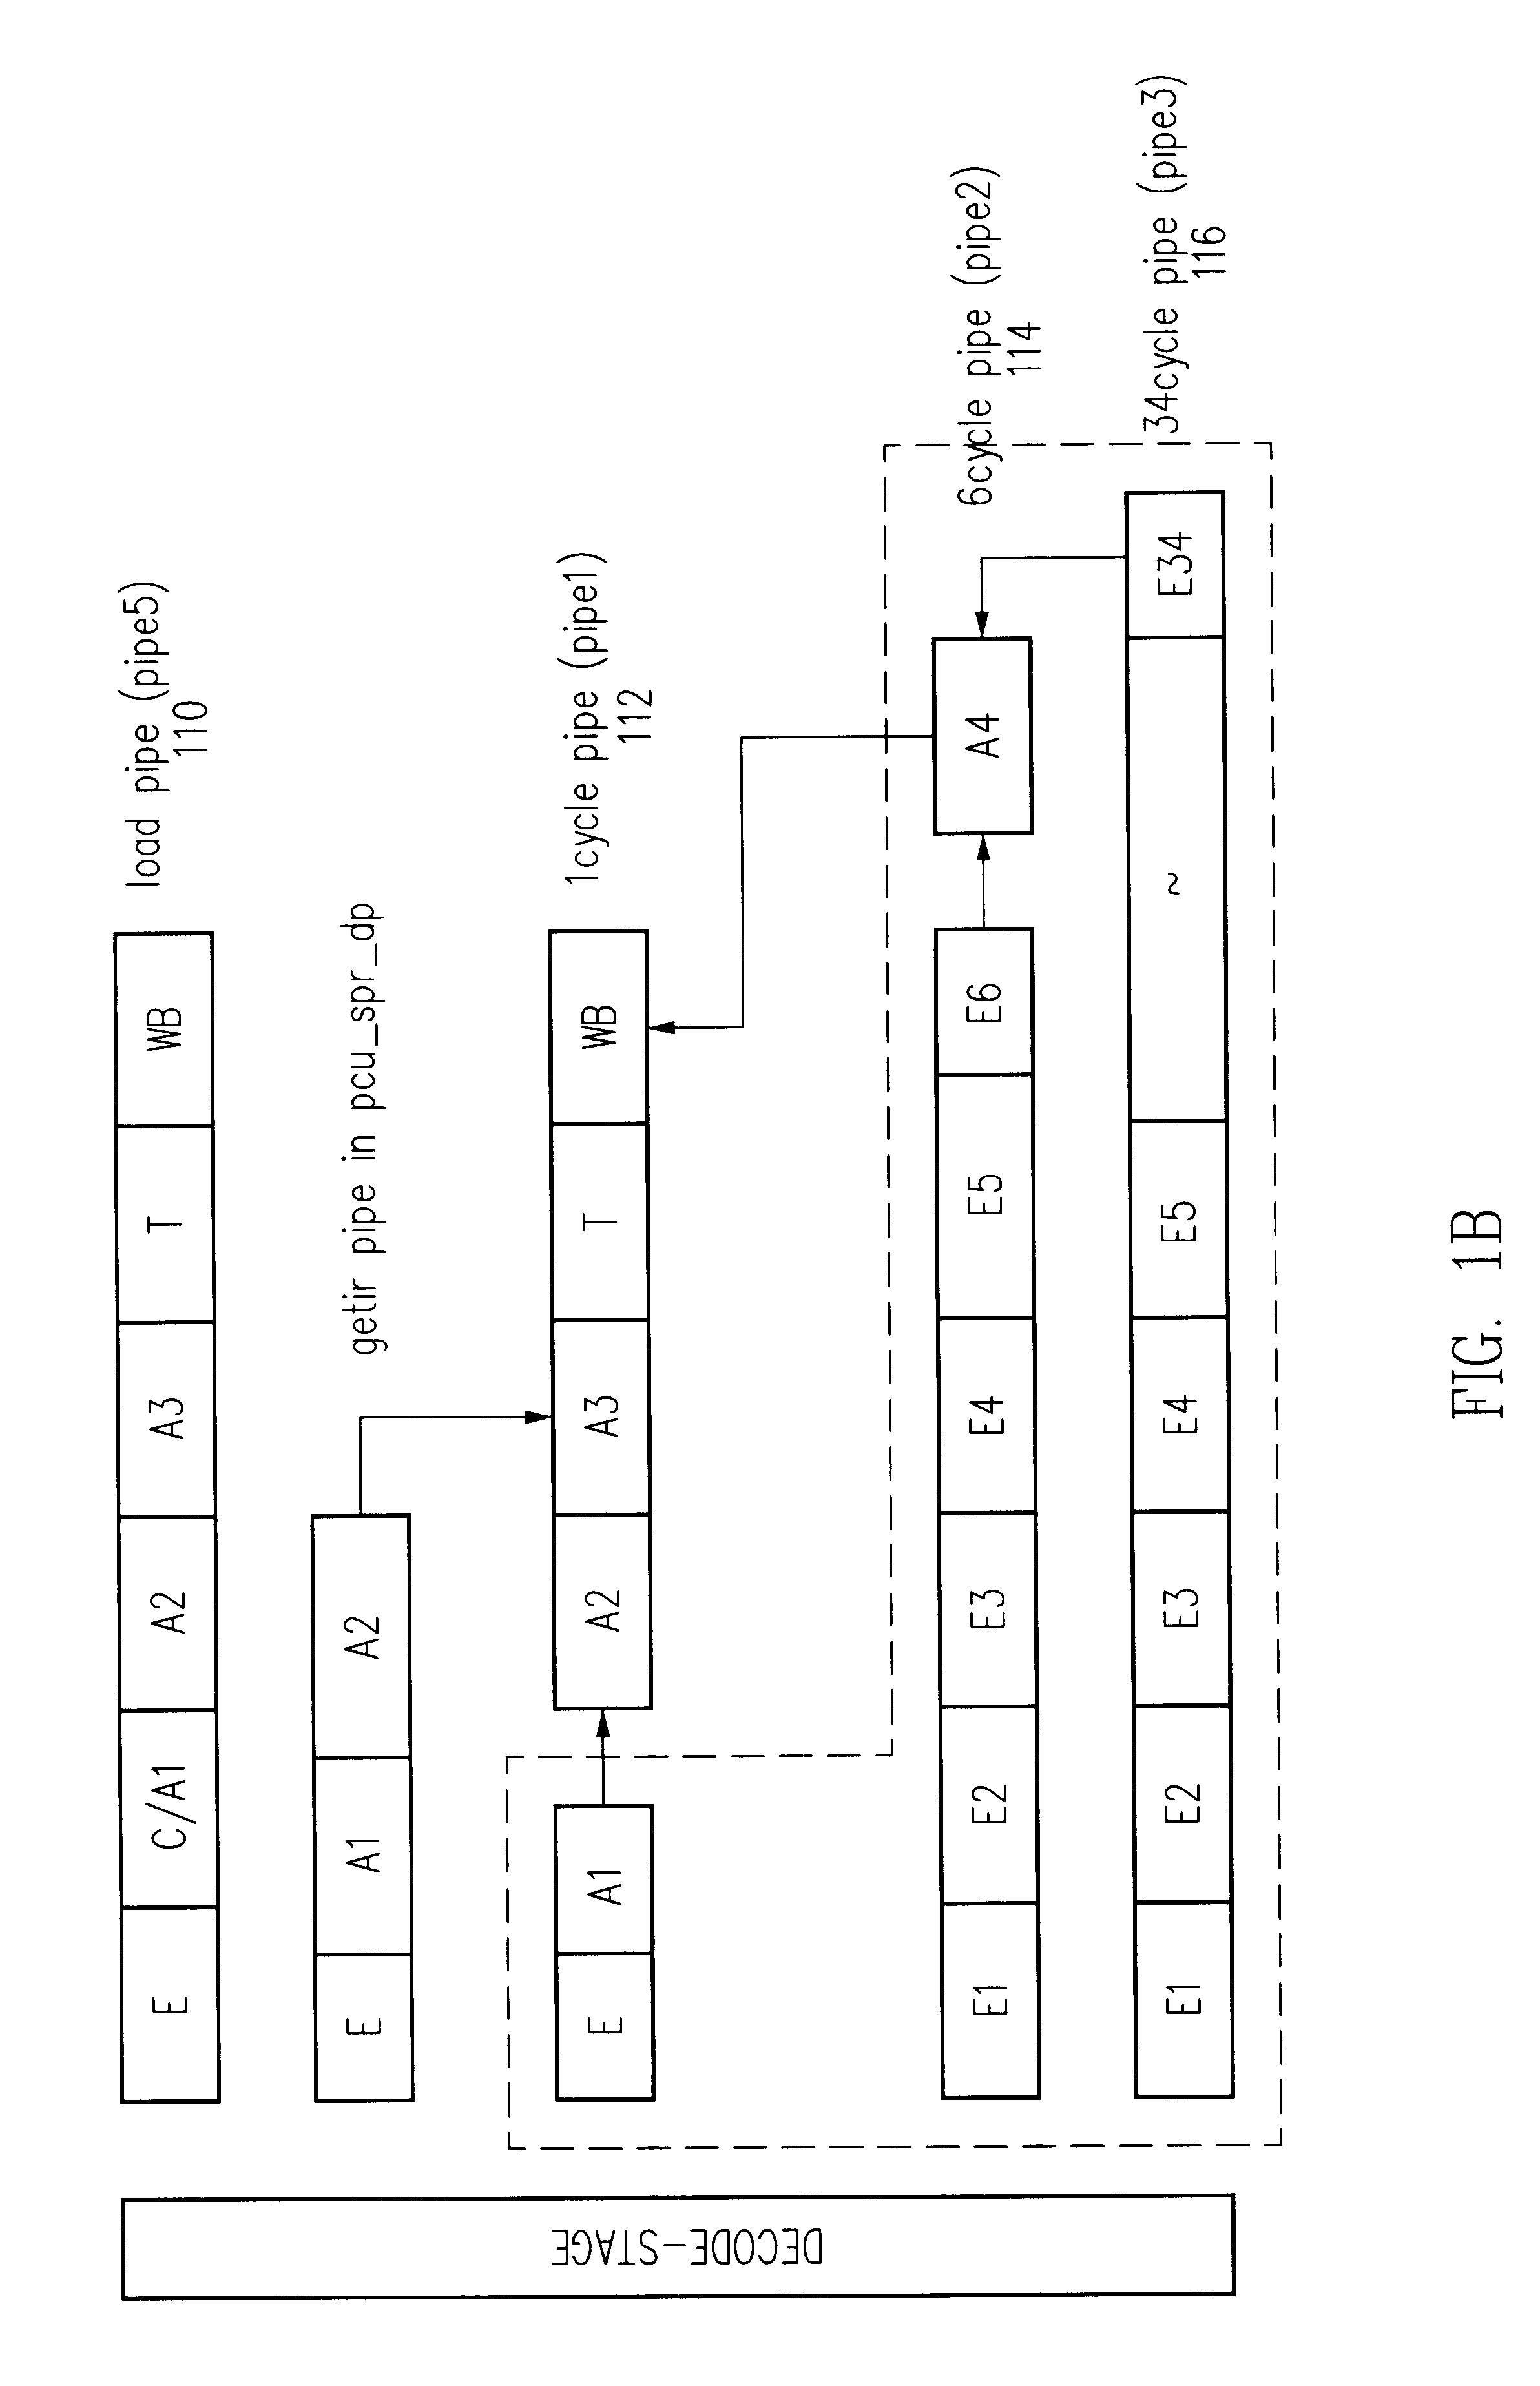 Parallel fixed point square root and reciprocal square root computation unit in a processor